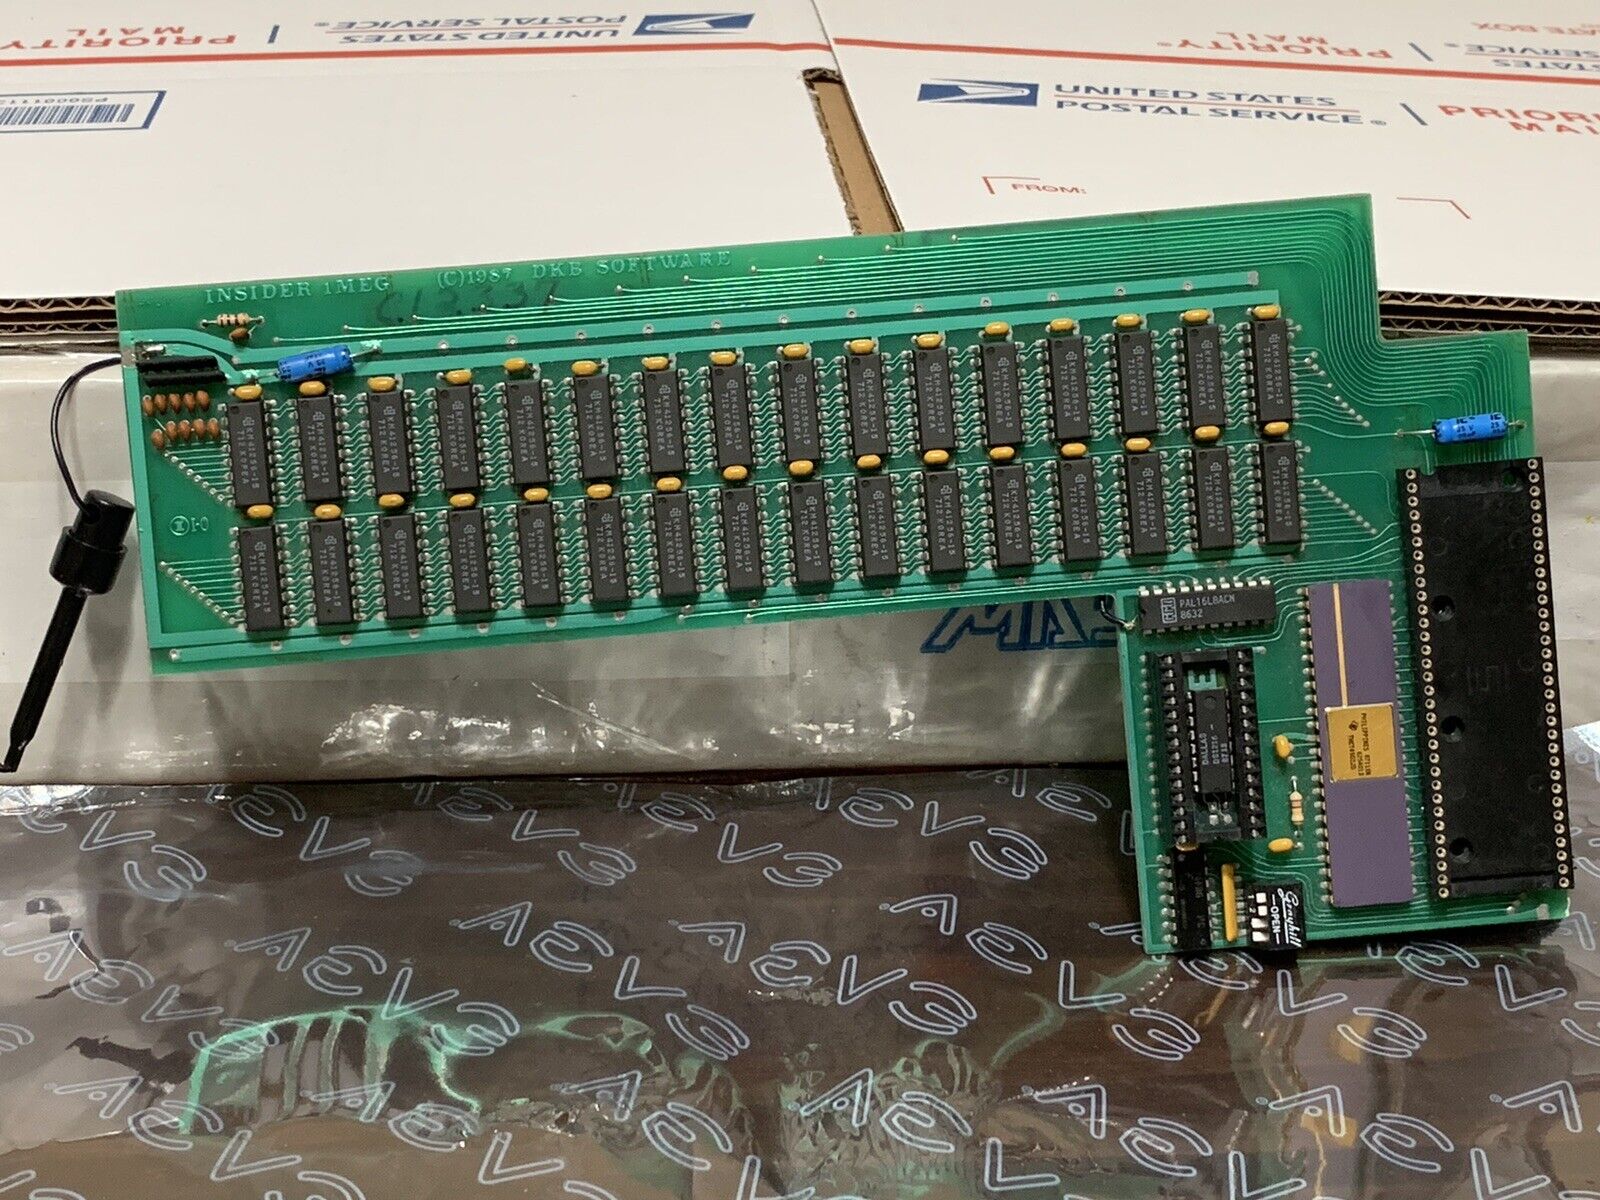 DKB Insider 1 Meg 1MB Memory and RTC Upgrade for Amiga 1000 for PARTS OR REPAIR